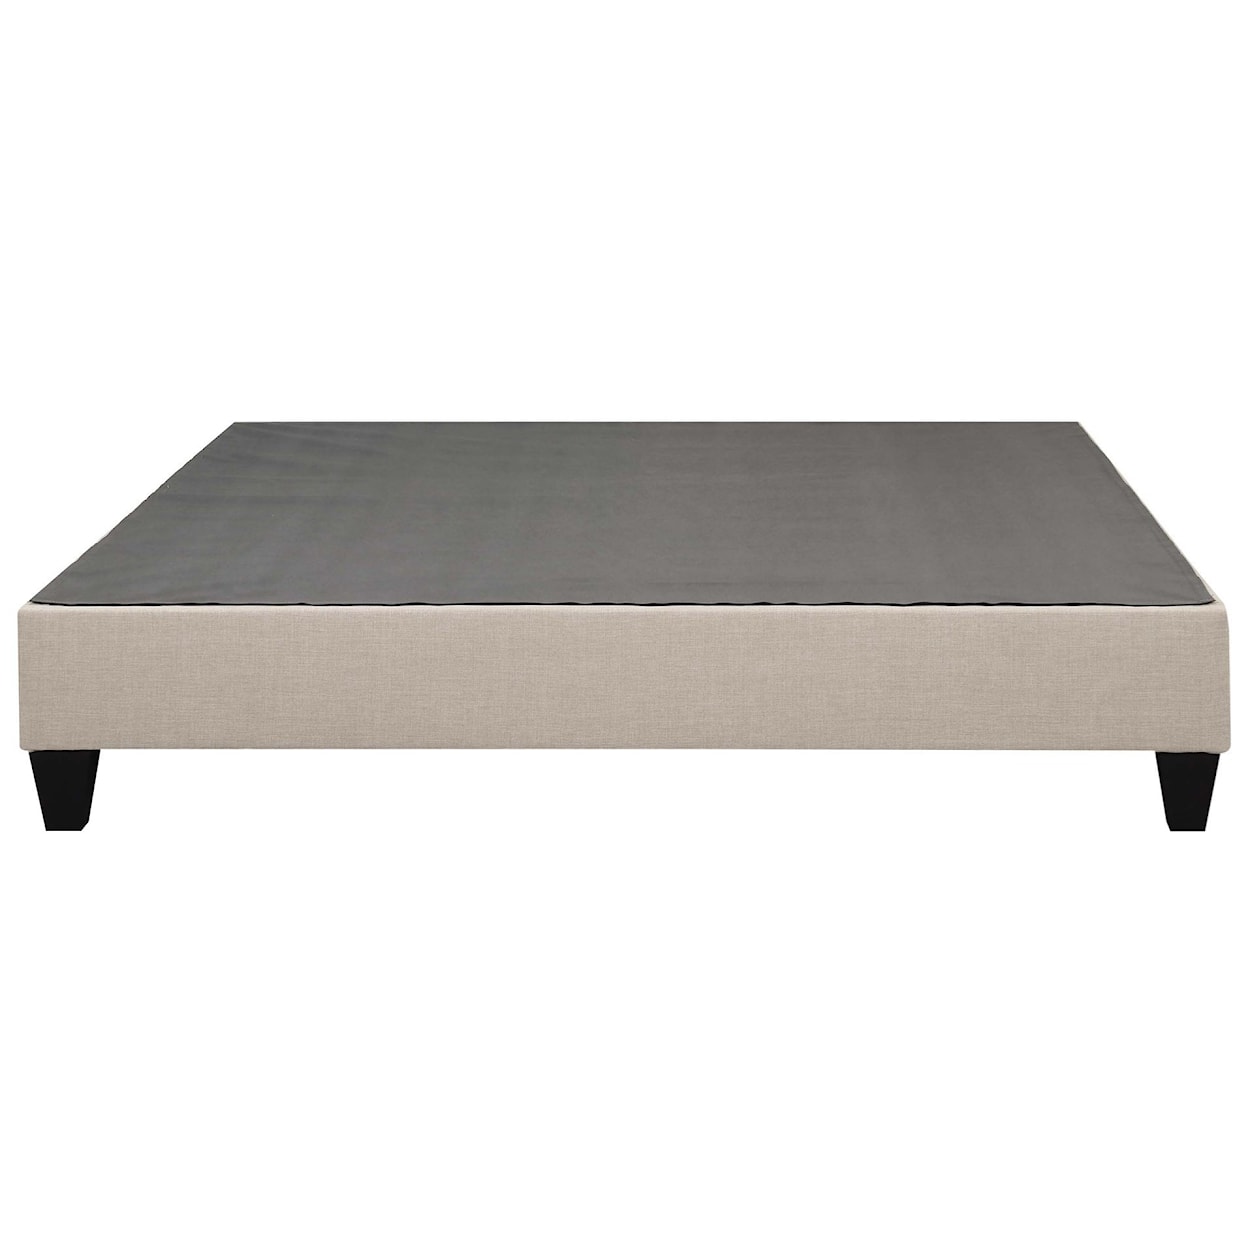 Elements Abby King Platform Bed